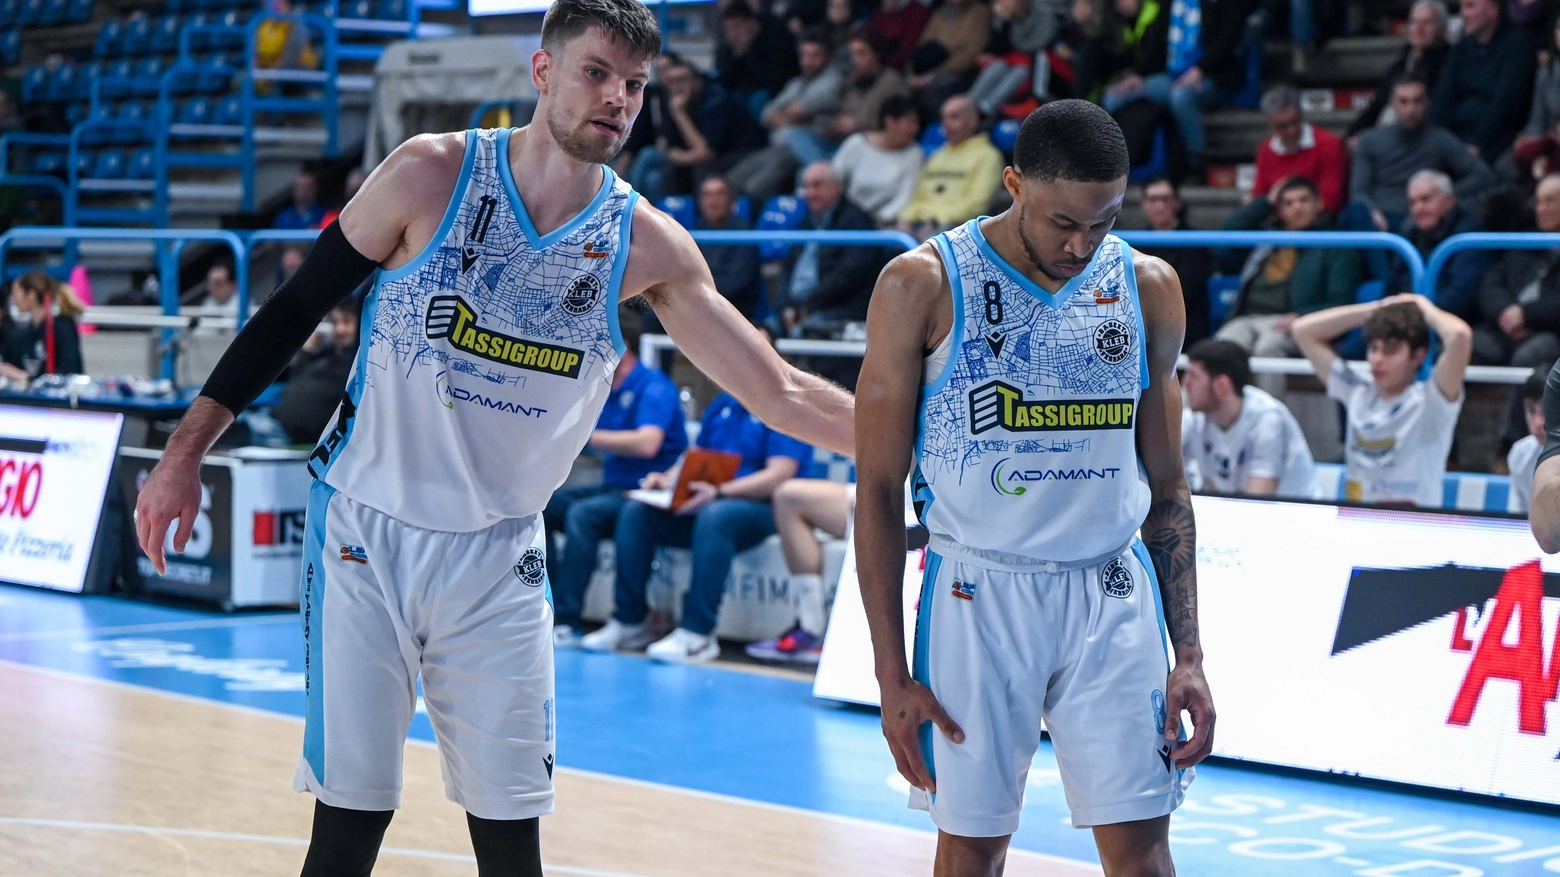 FERRARA-CIVIDALE CAMPIONATO SERIE A2 BASKET 2022-2023 ANDREW SMITH CONSOLA ANDY CLEAVES